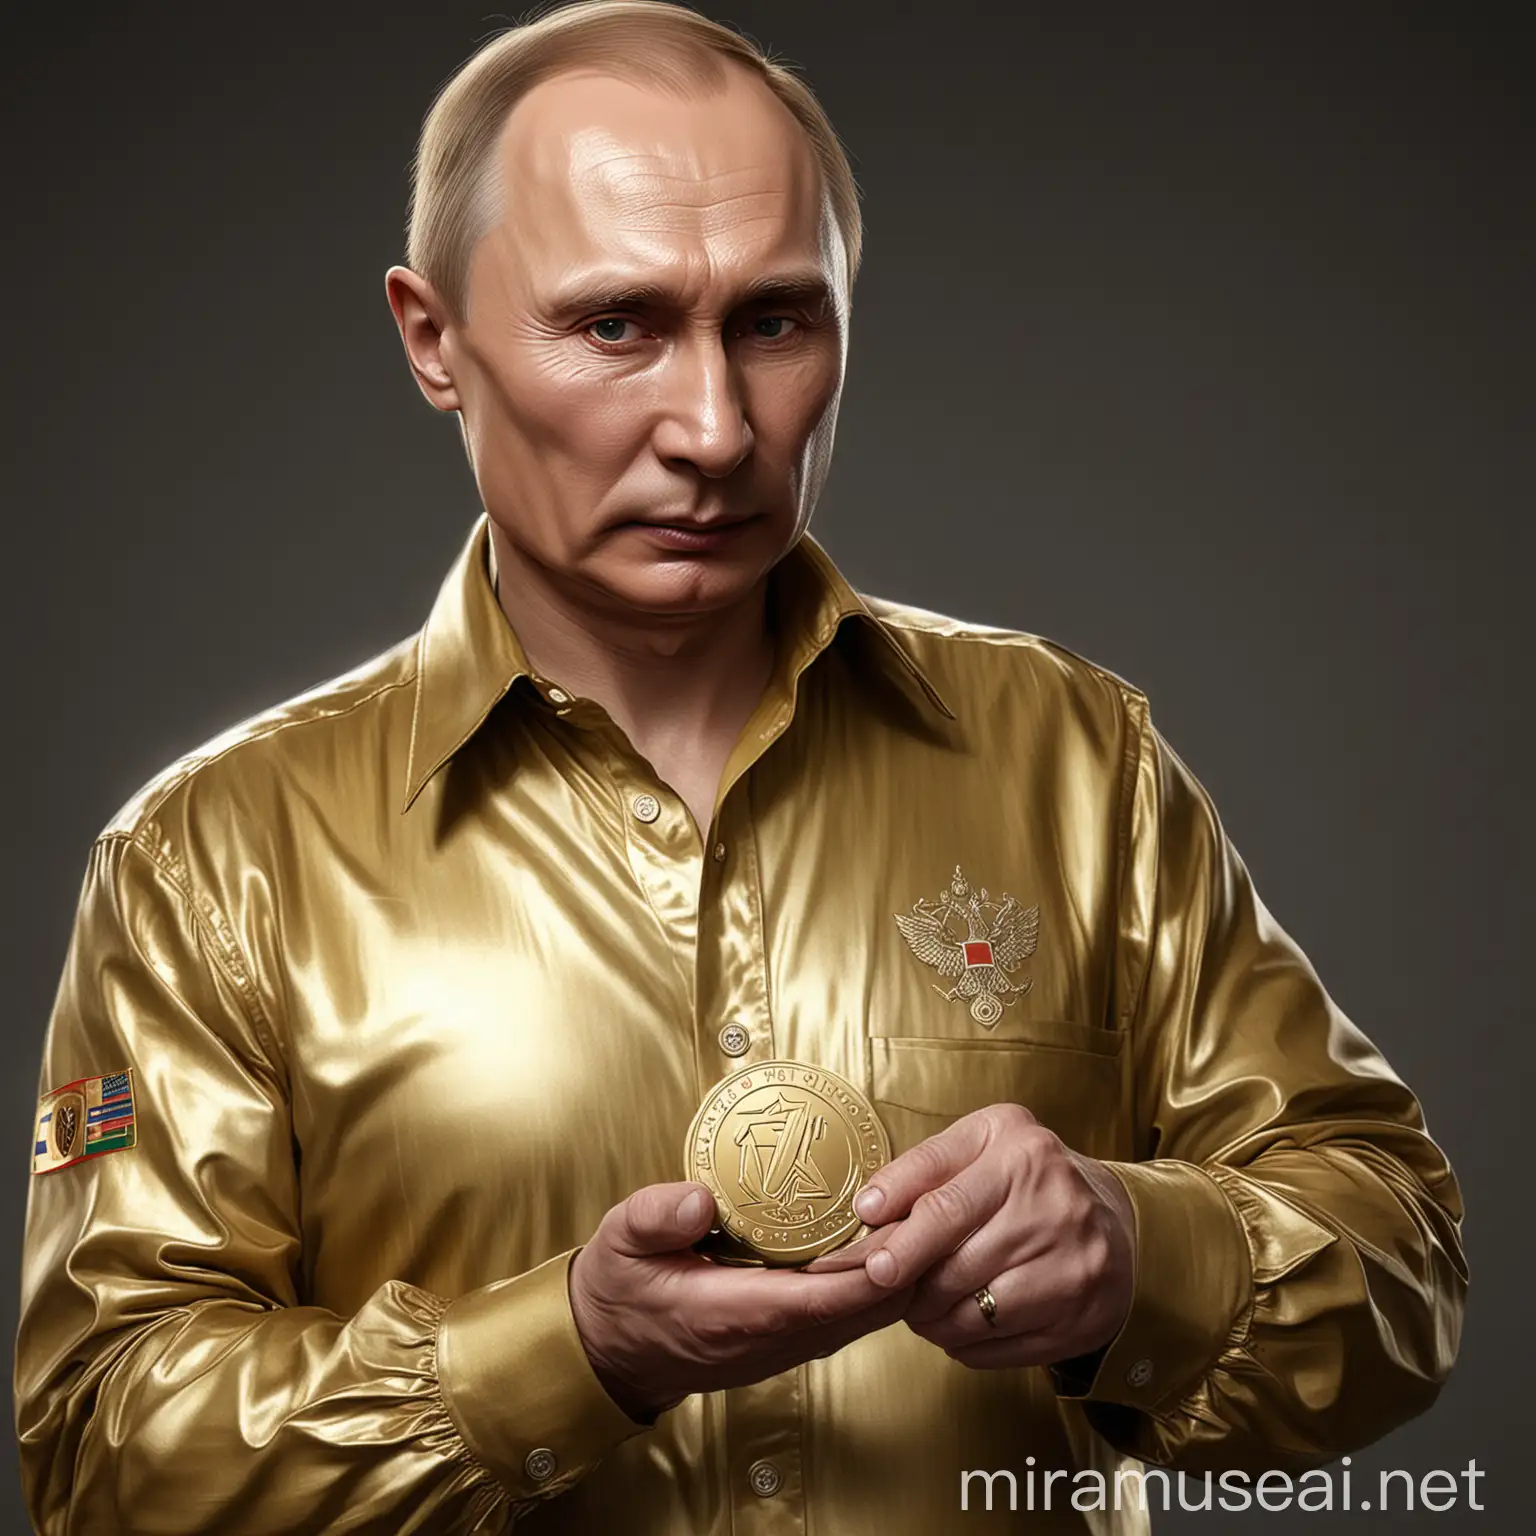 vladimir putin wearing a shining gold shirt holding a coin, with WOT letter Logo on the coin, realistic, high resolution